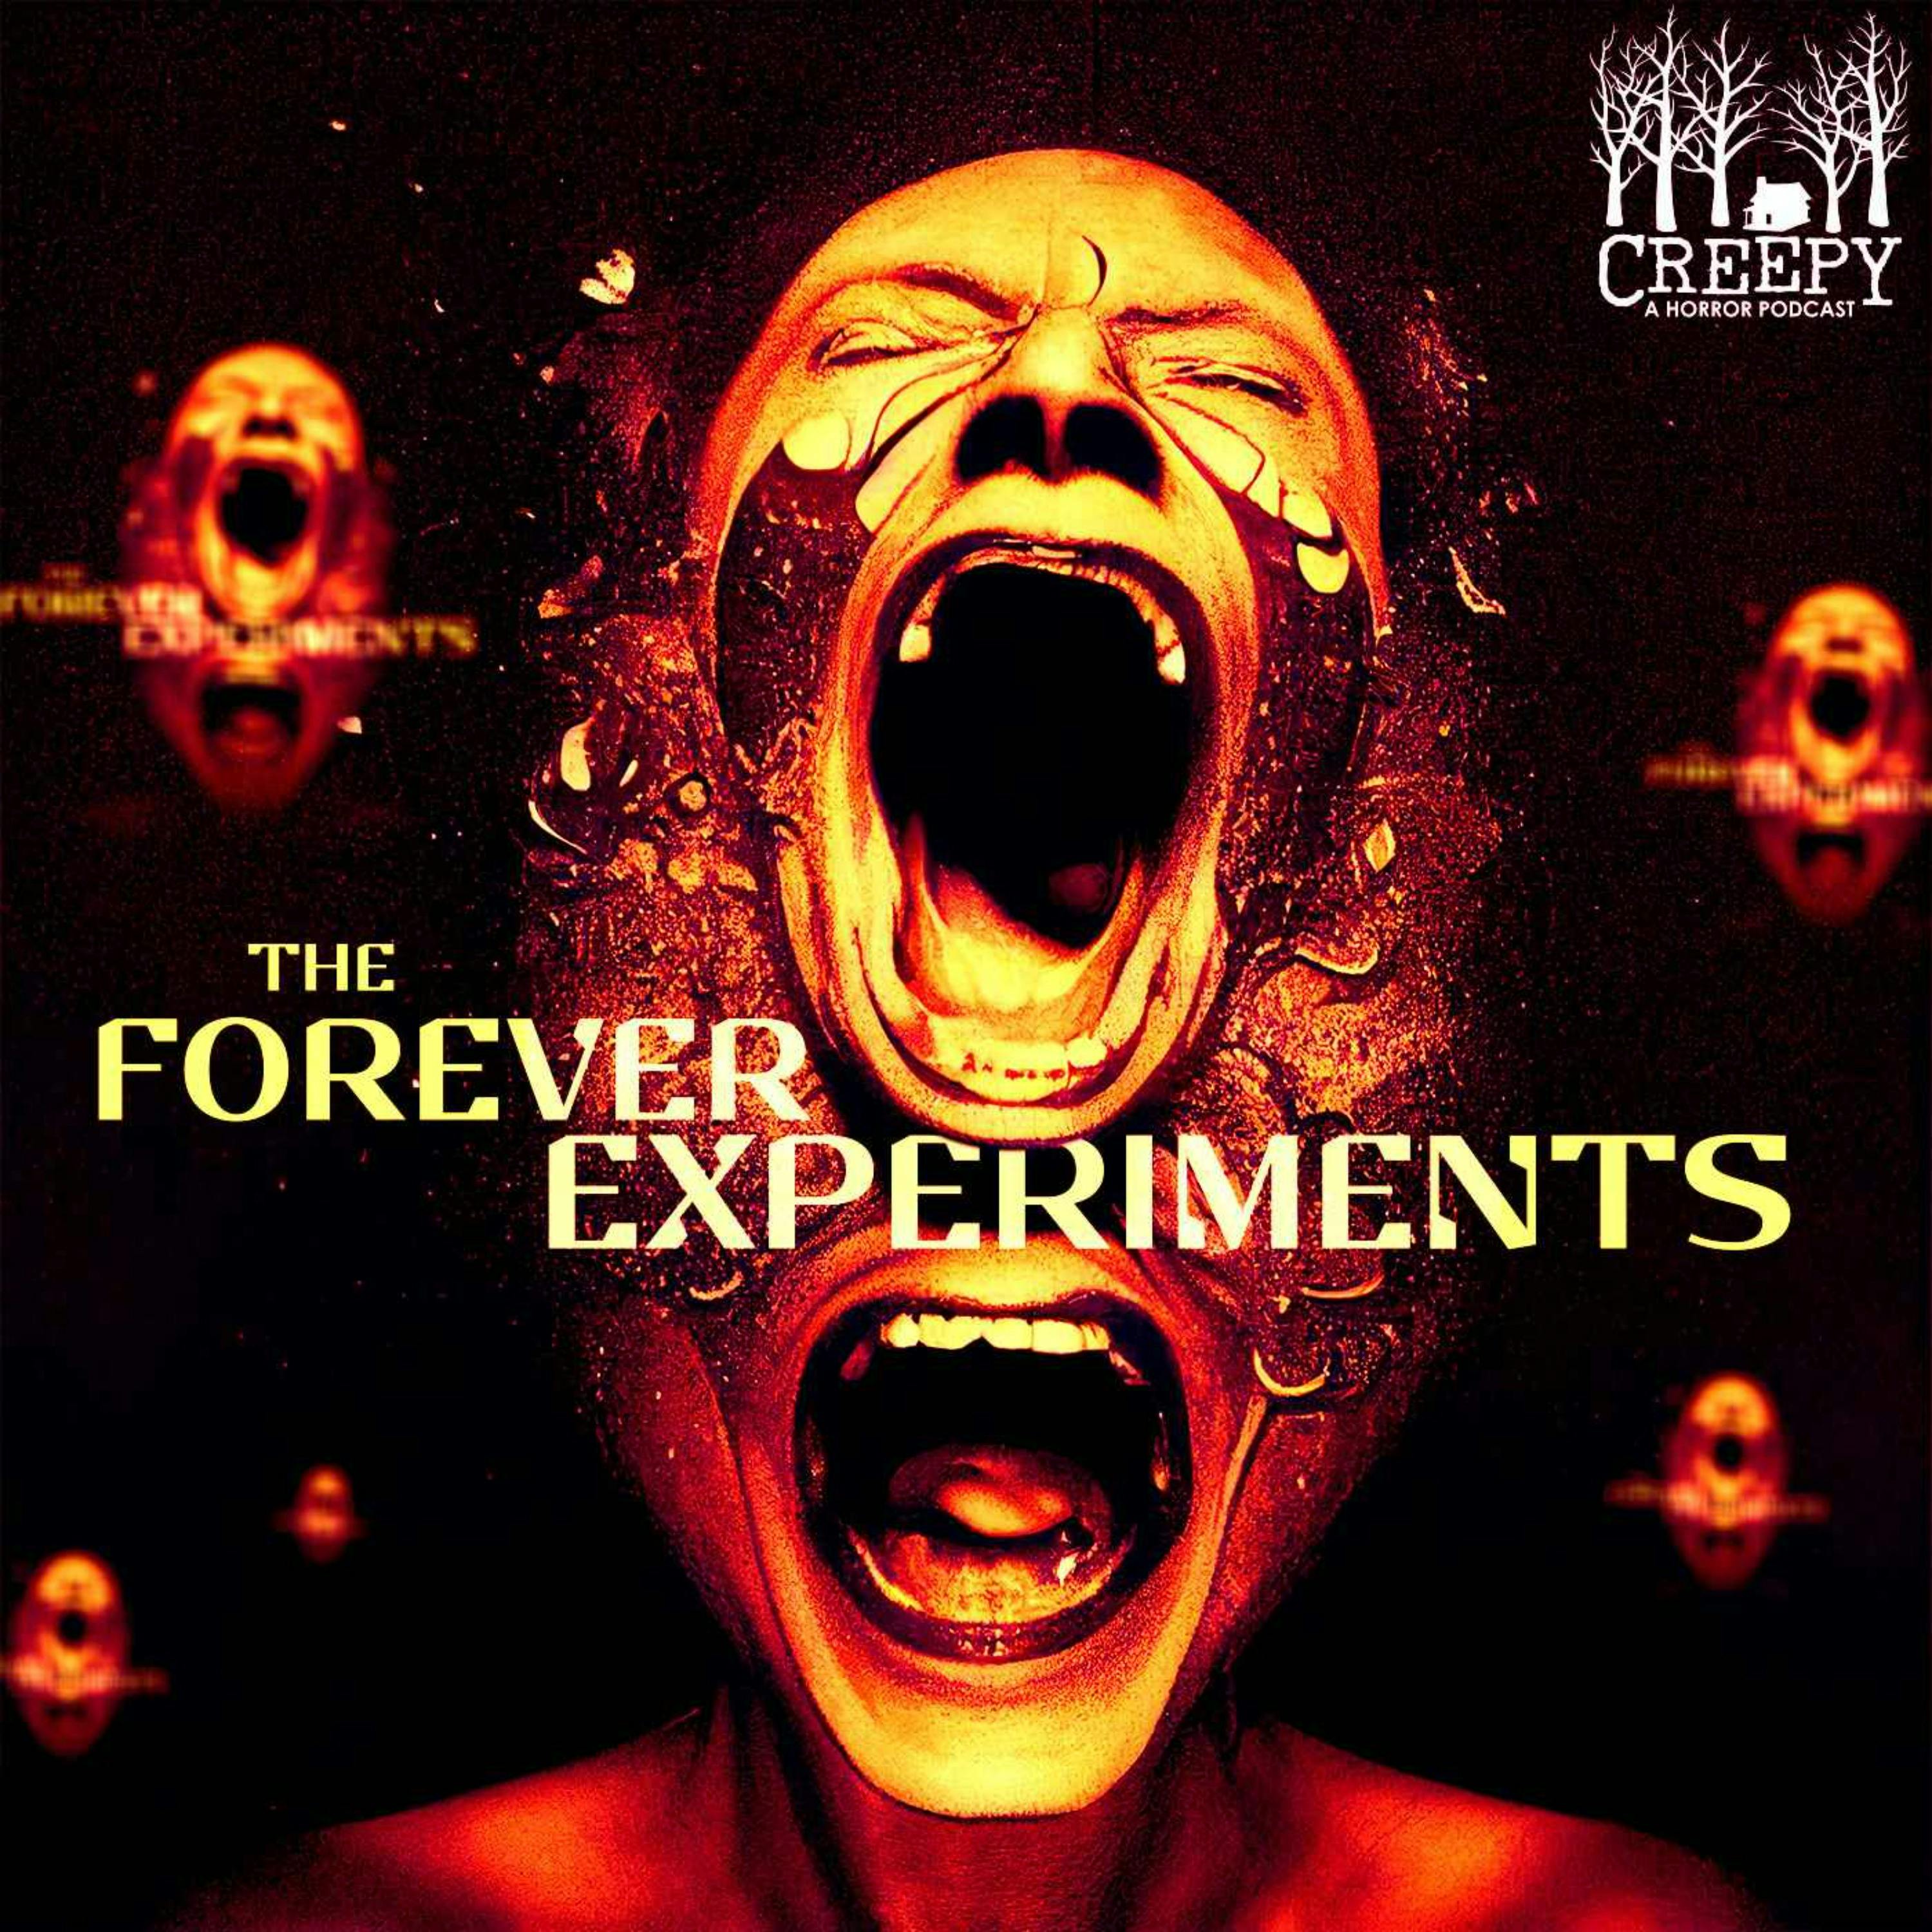 The Forever Experiments